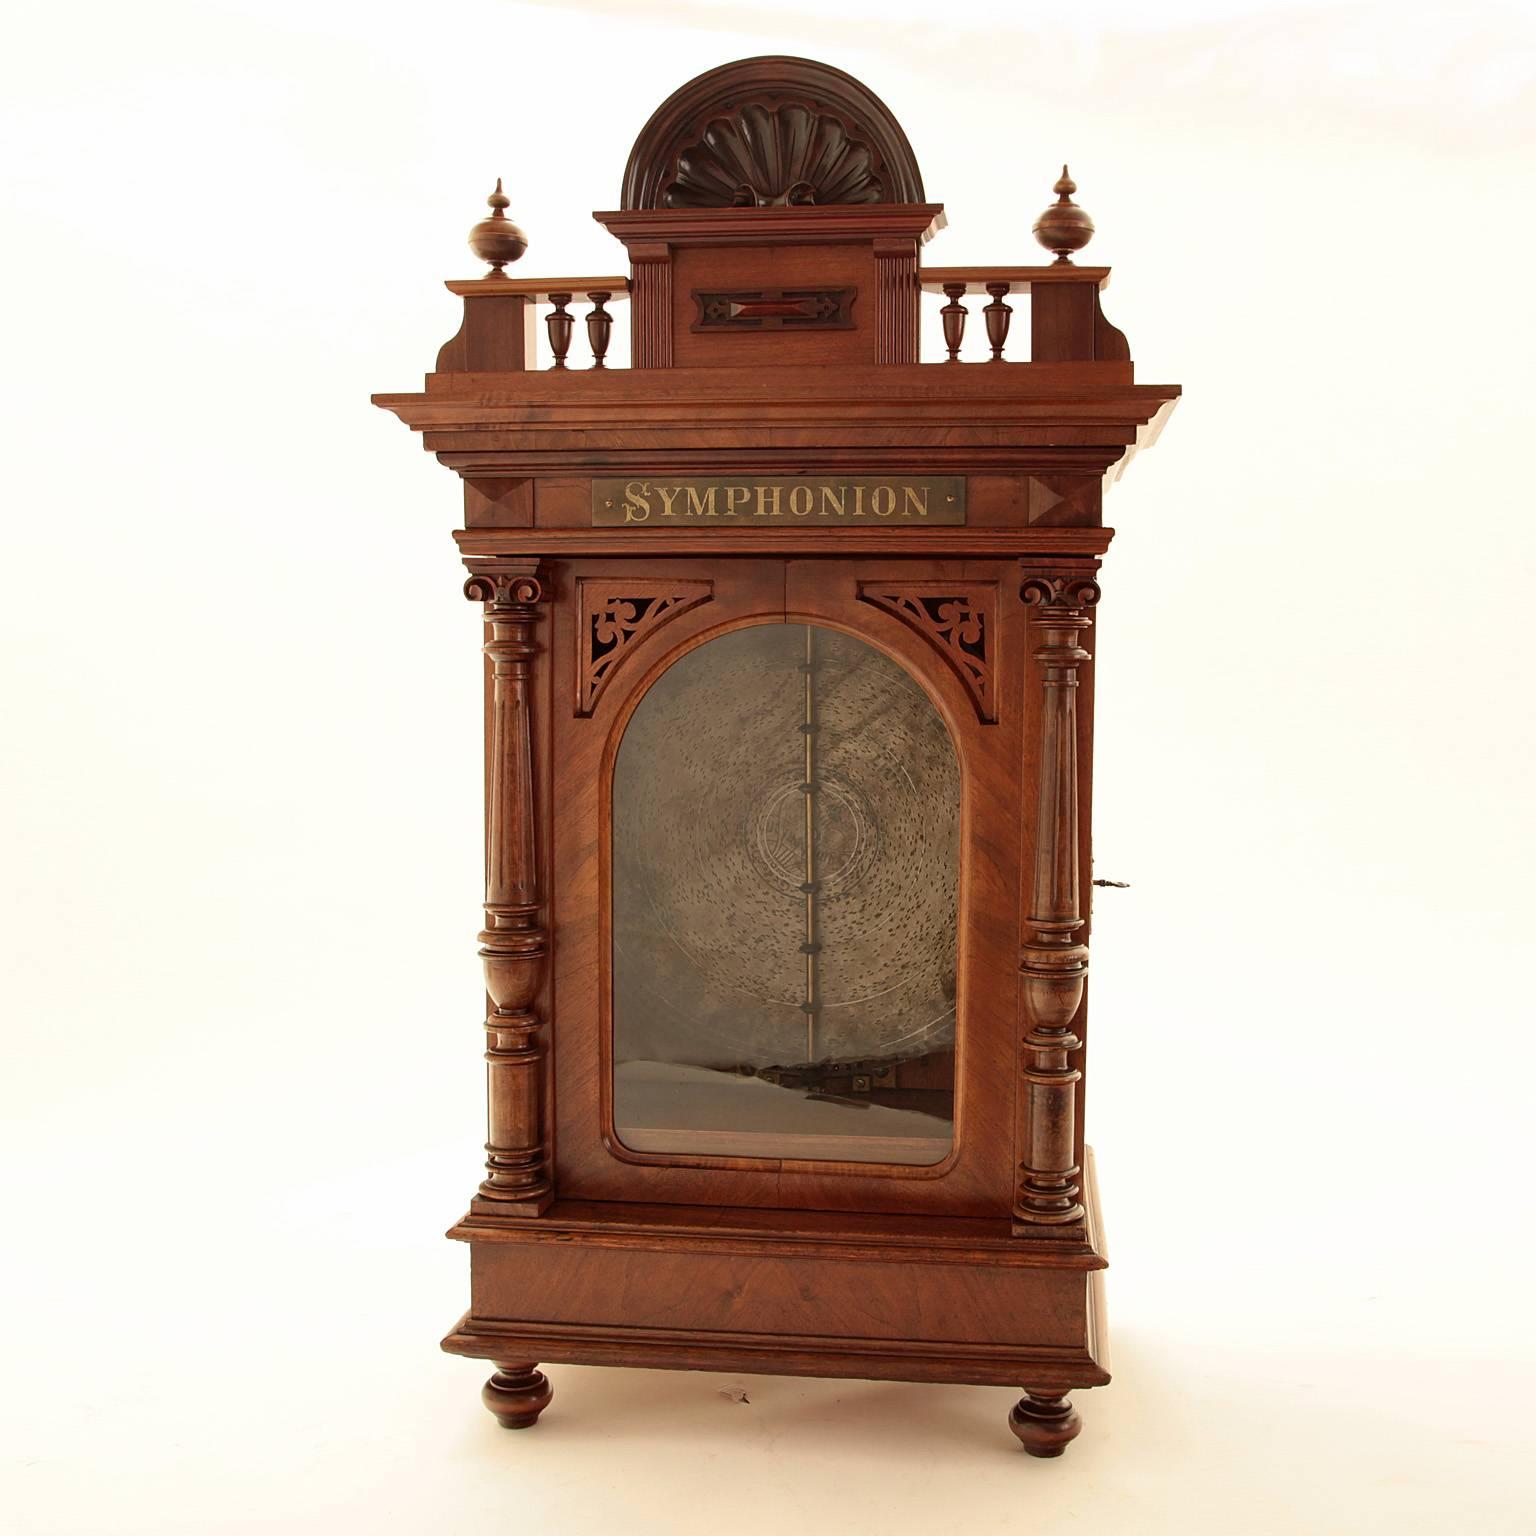 A lovely symphonion in a walnut case with a Gründerzeit pediment, which can be used free standing or hung on a wall. The symphonion has a double comb and a slot on the side to insert a five pfennig coin. No teeth are missing and none have been